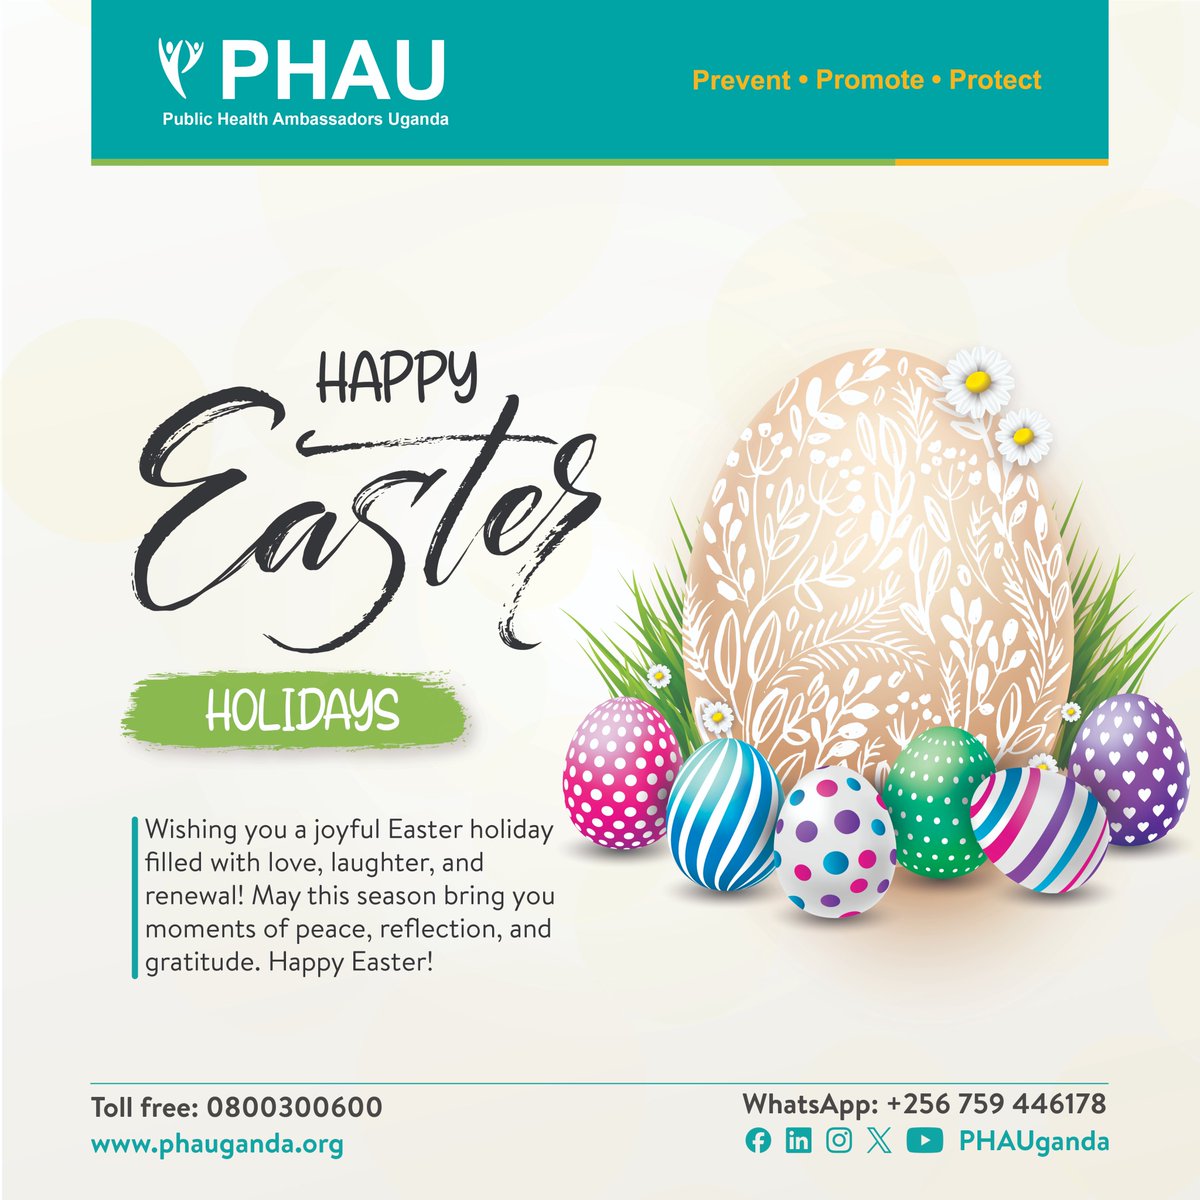 On this glorious Easter Sunday, let's rejoice in the triumph of life over death, hope over despair, and love over everything. Wishing you a day filled with laughter, happiness, and the blessings of the season. #PHAUCARES #EasterSunday #ResurrectionSunday